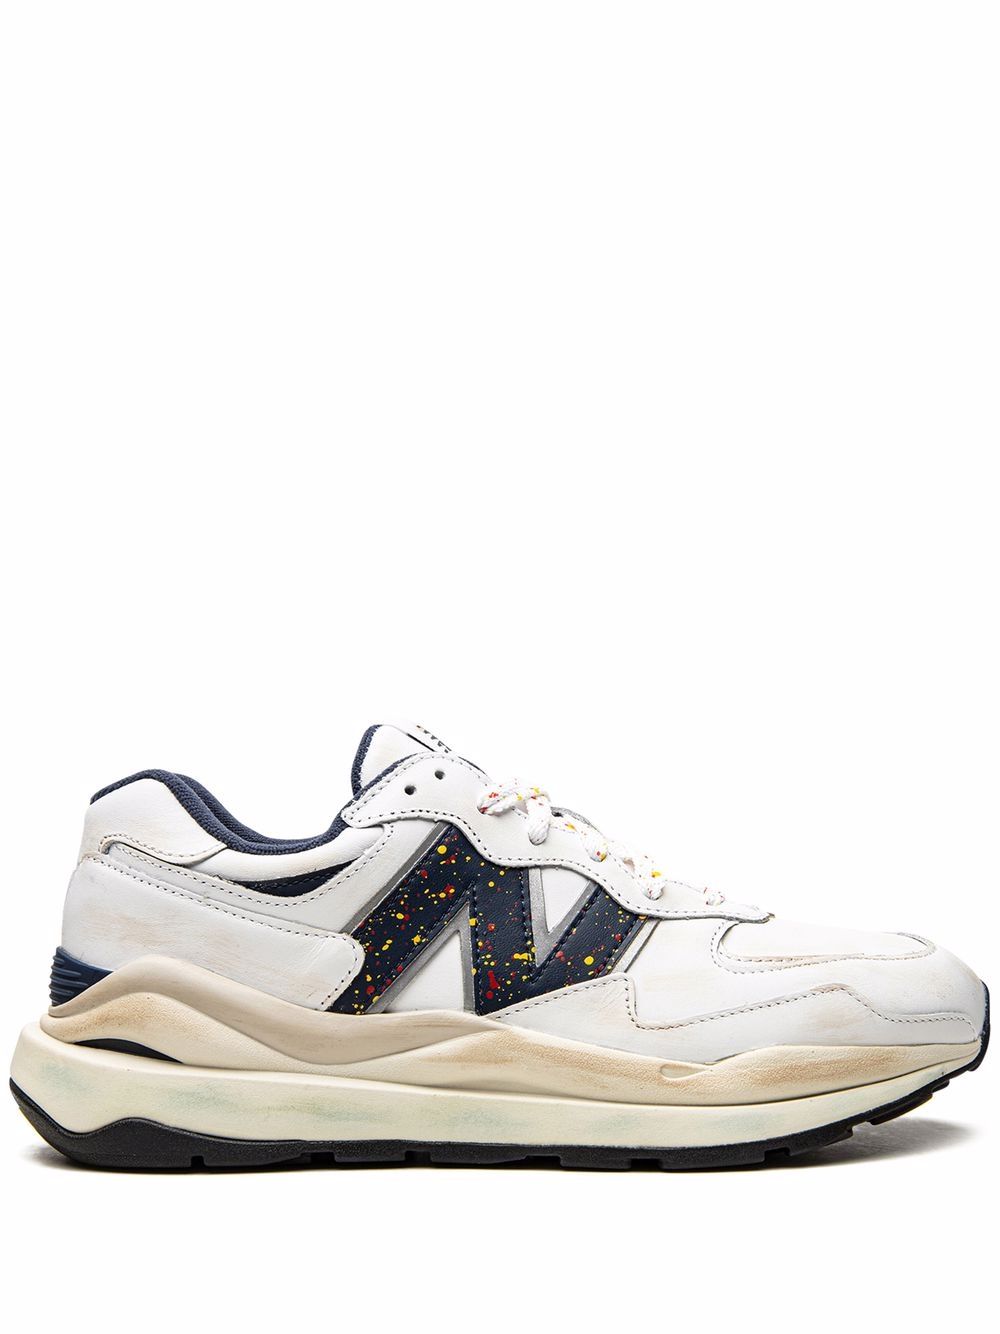 New Balance 57/40 low-top sneakers - White